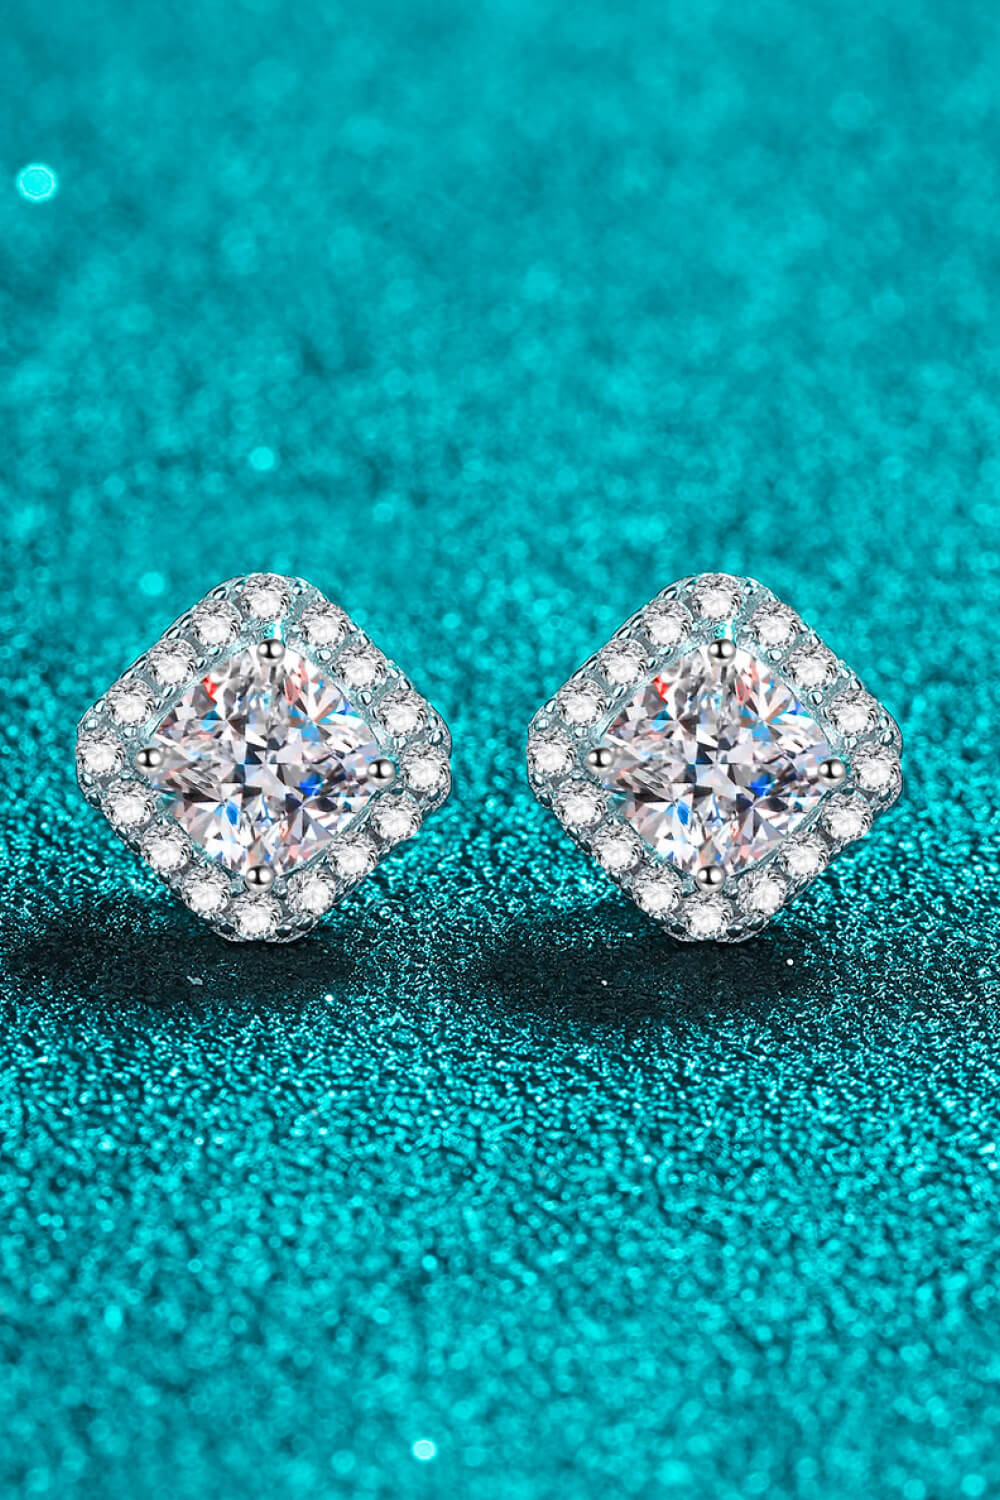 925 Sterling Silver Inlaid 2 Carat Moissanite Square Stud Earrings